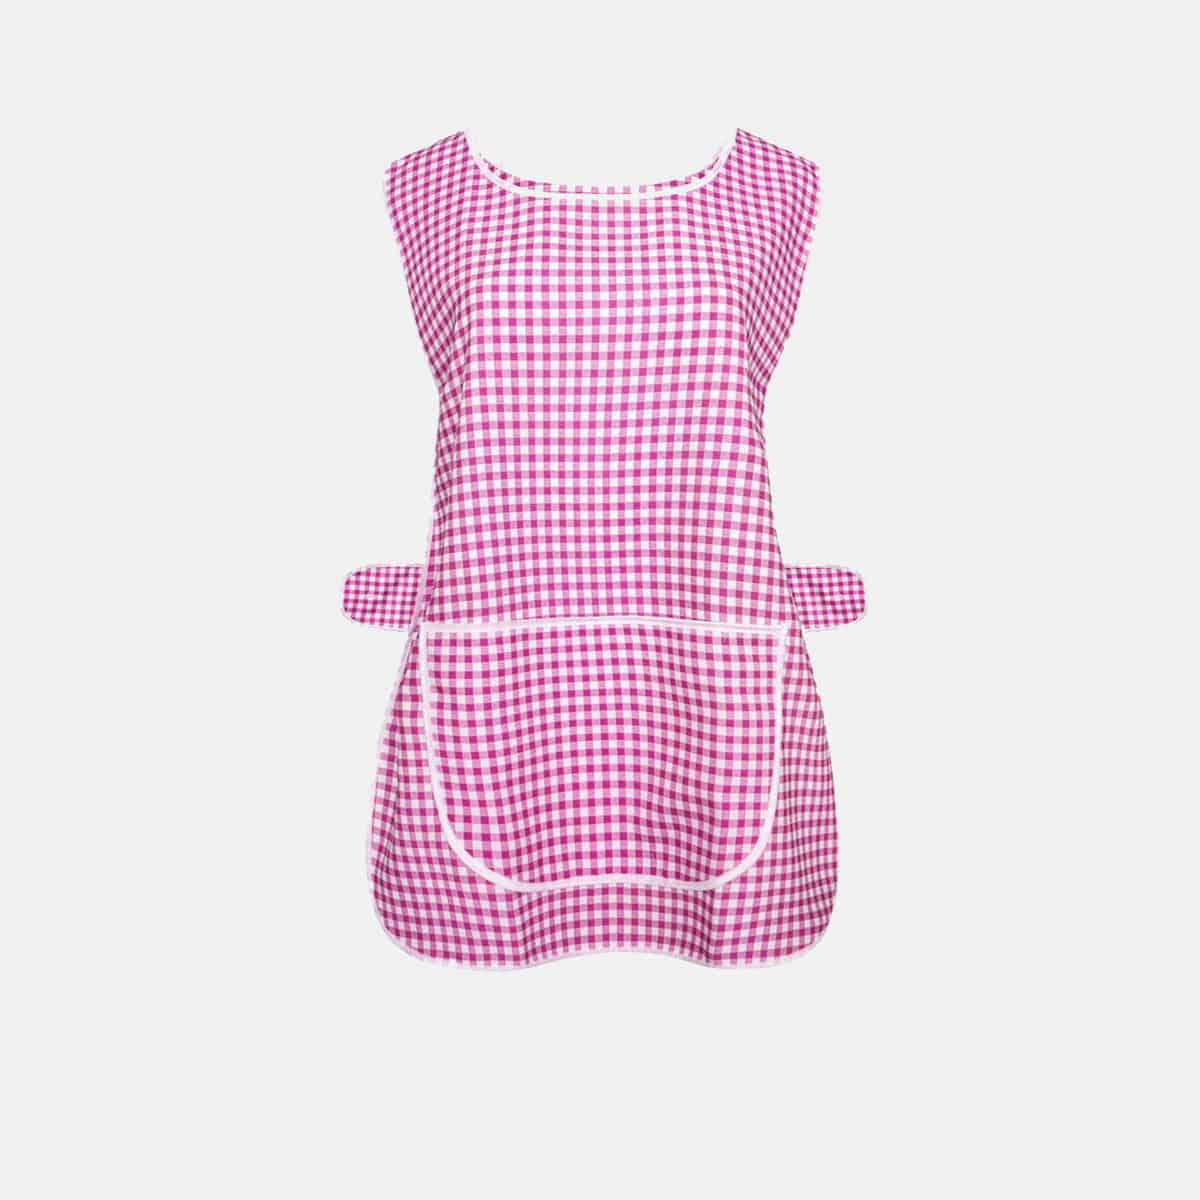 Ladies Check Design Overall Front Pocket Kitchen Cooking Cleaning Tabards